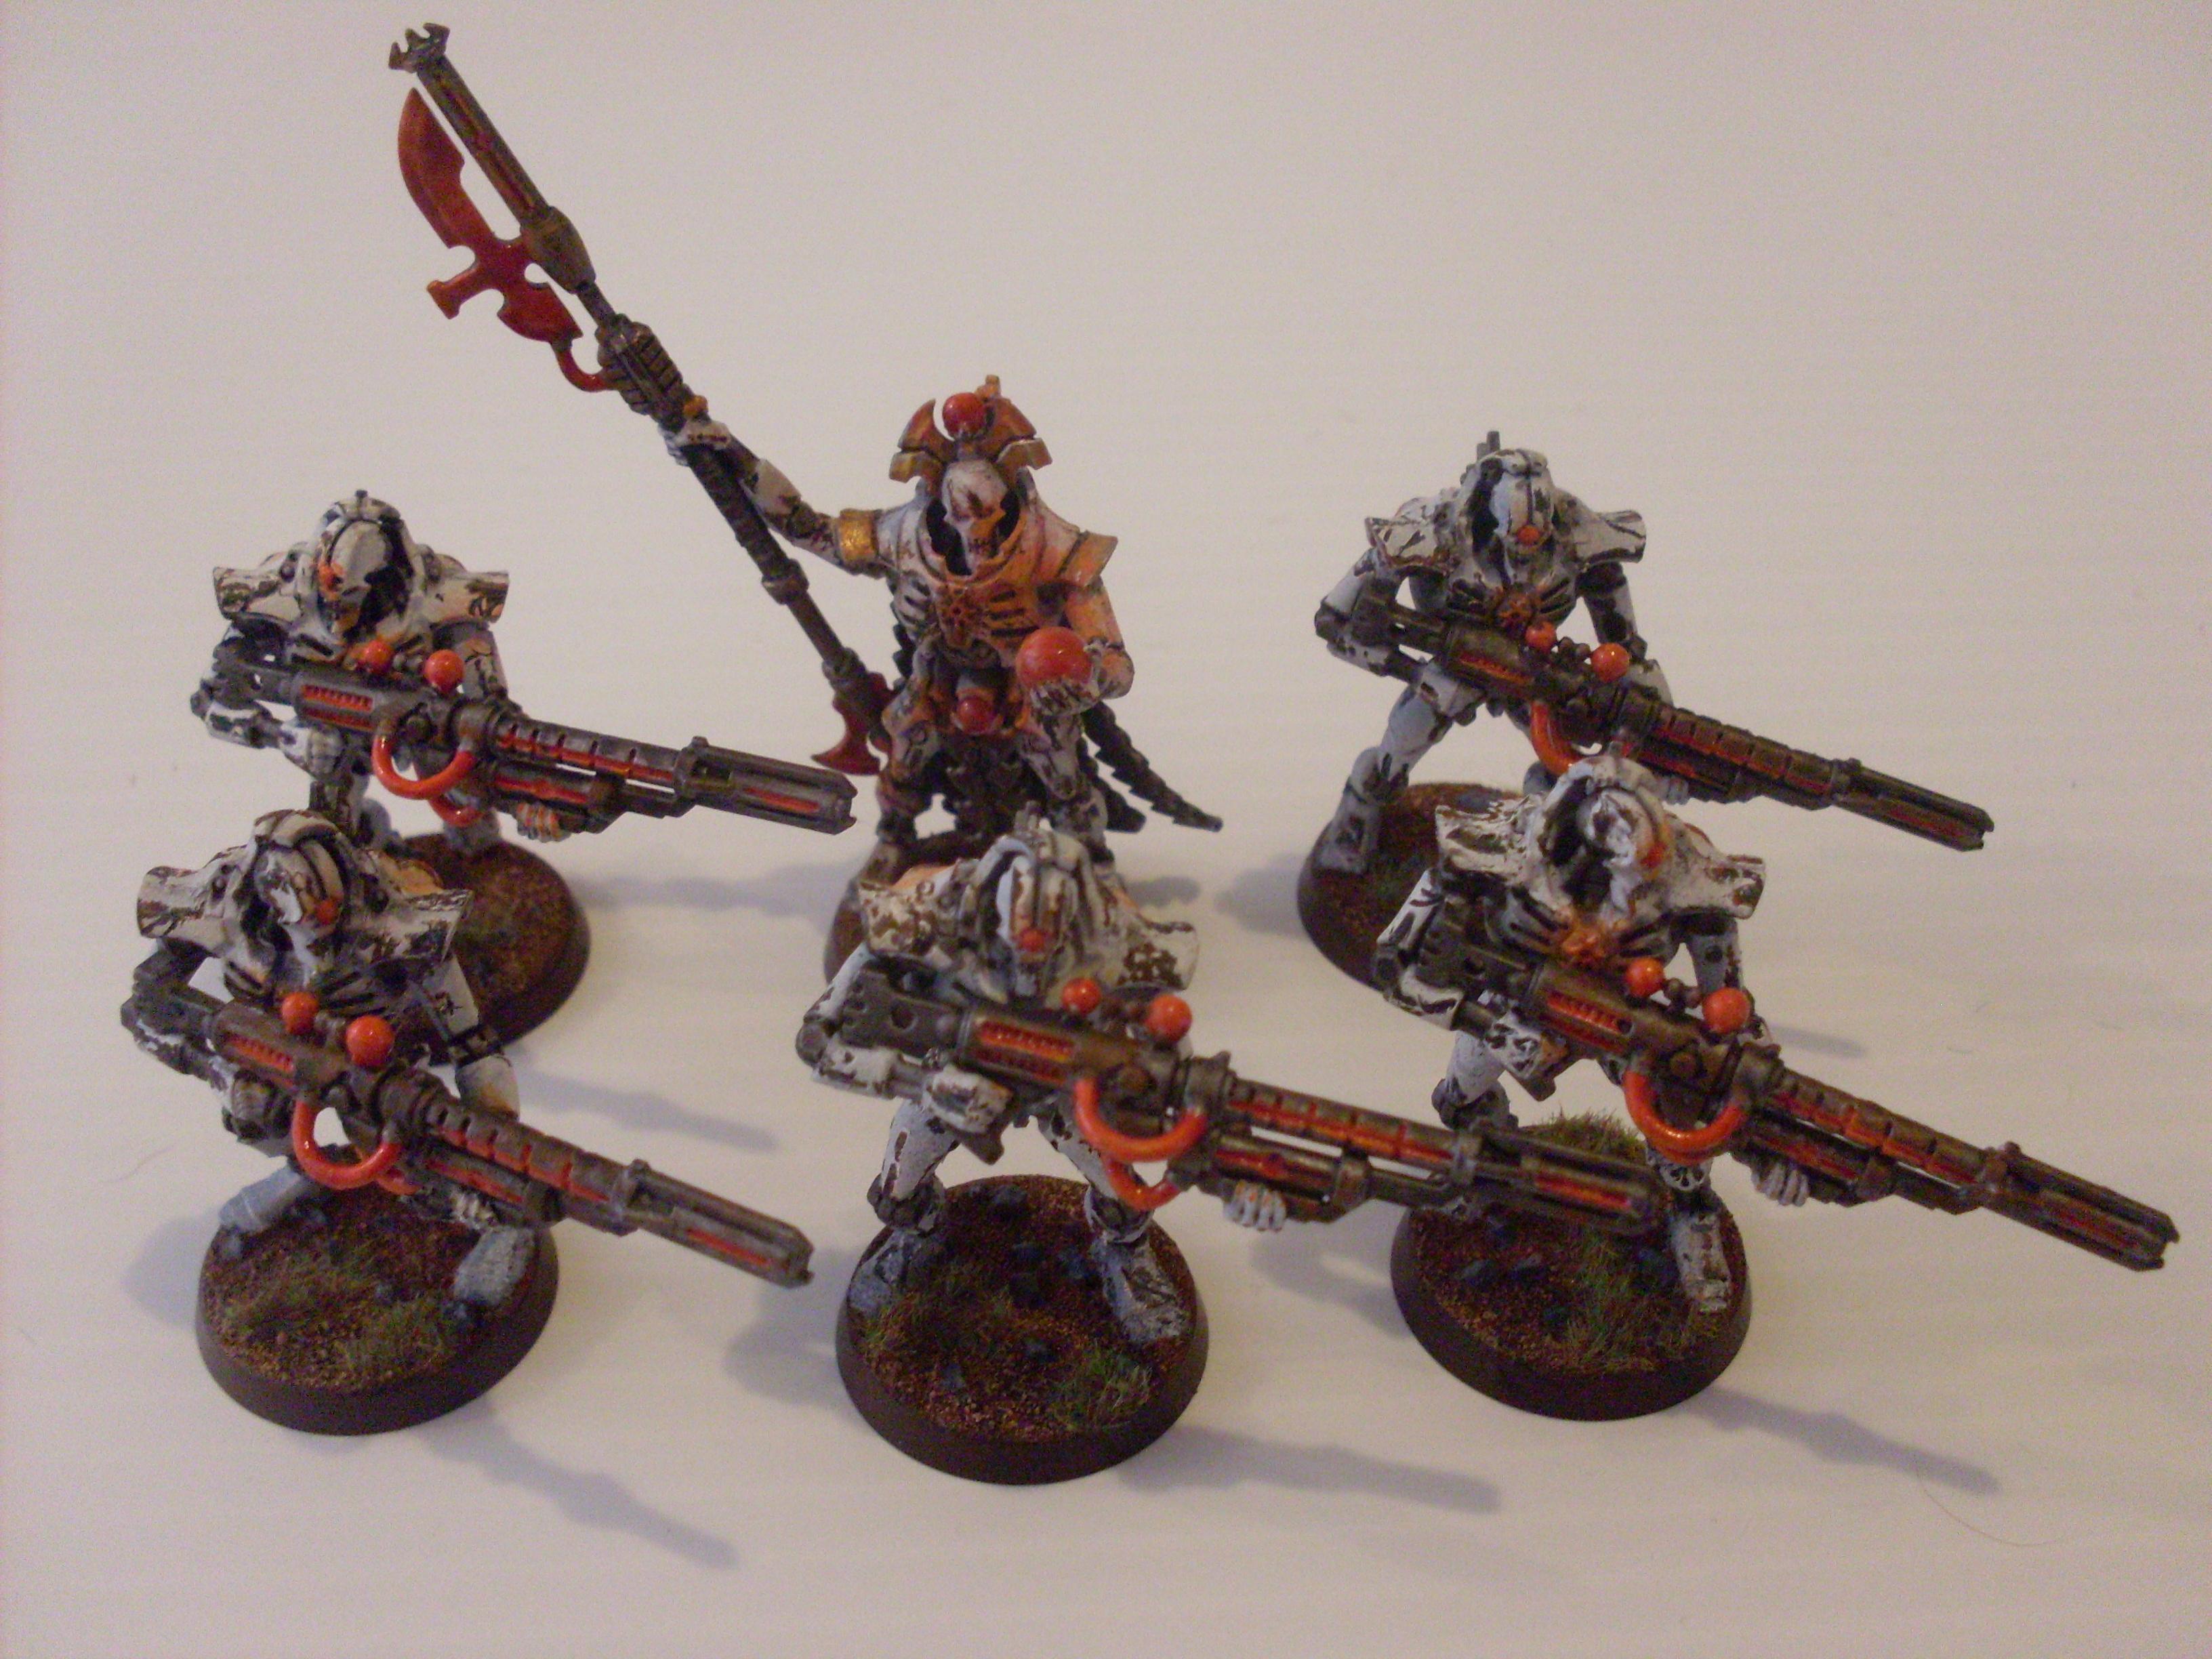 Airforce, Deathmarks, Doomscythe, Lord, Necrons, Nightscythe, Orange, Overlord, Red, Rust, Scarabs, Scythe, Tomb Blade, Warriors, White